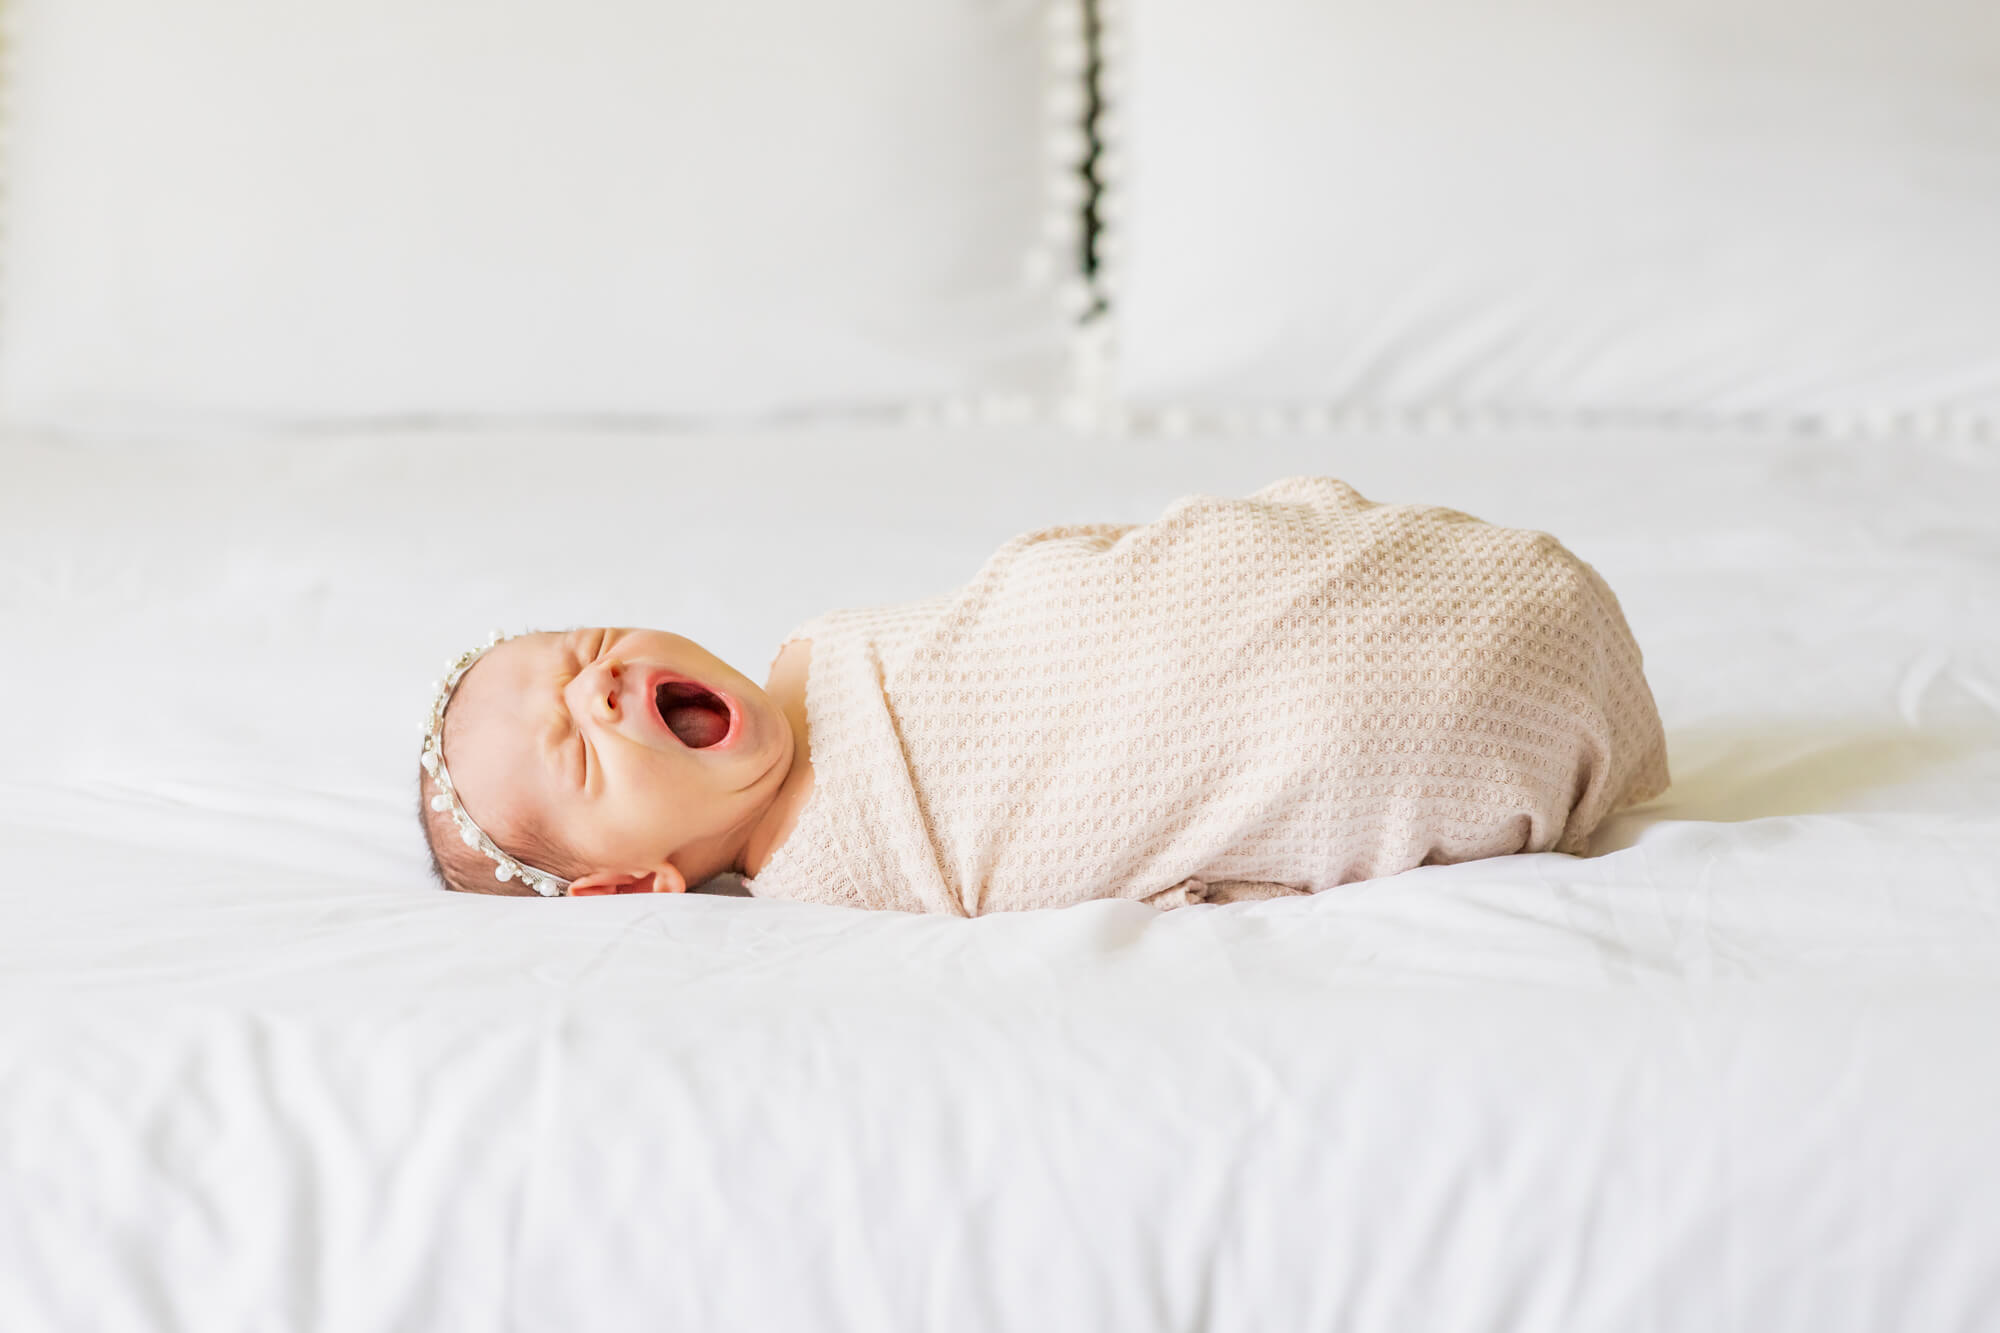 newborn baby wrapped in neutral colors yawning on a bed Water Birth Birmingham AL